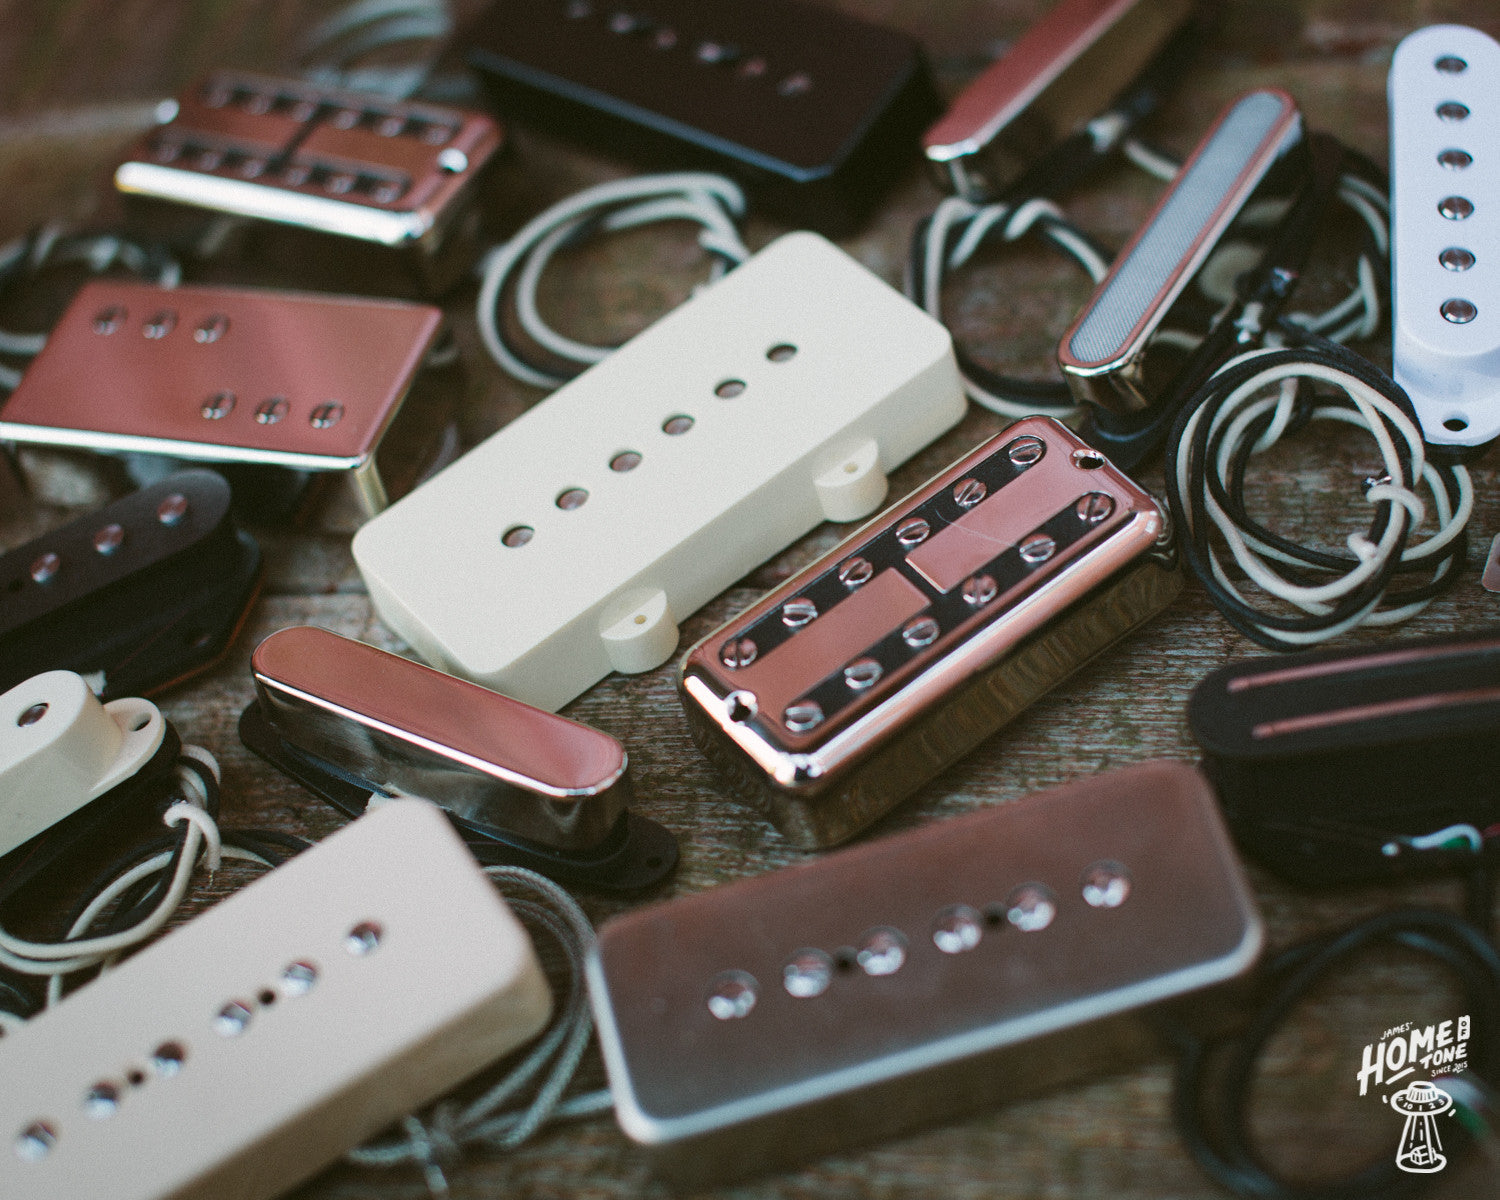 Thinking of swapping your pickups? - A handy guide for new tone hunters!